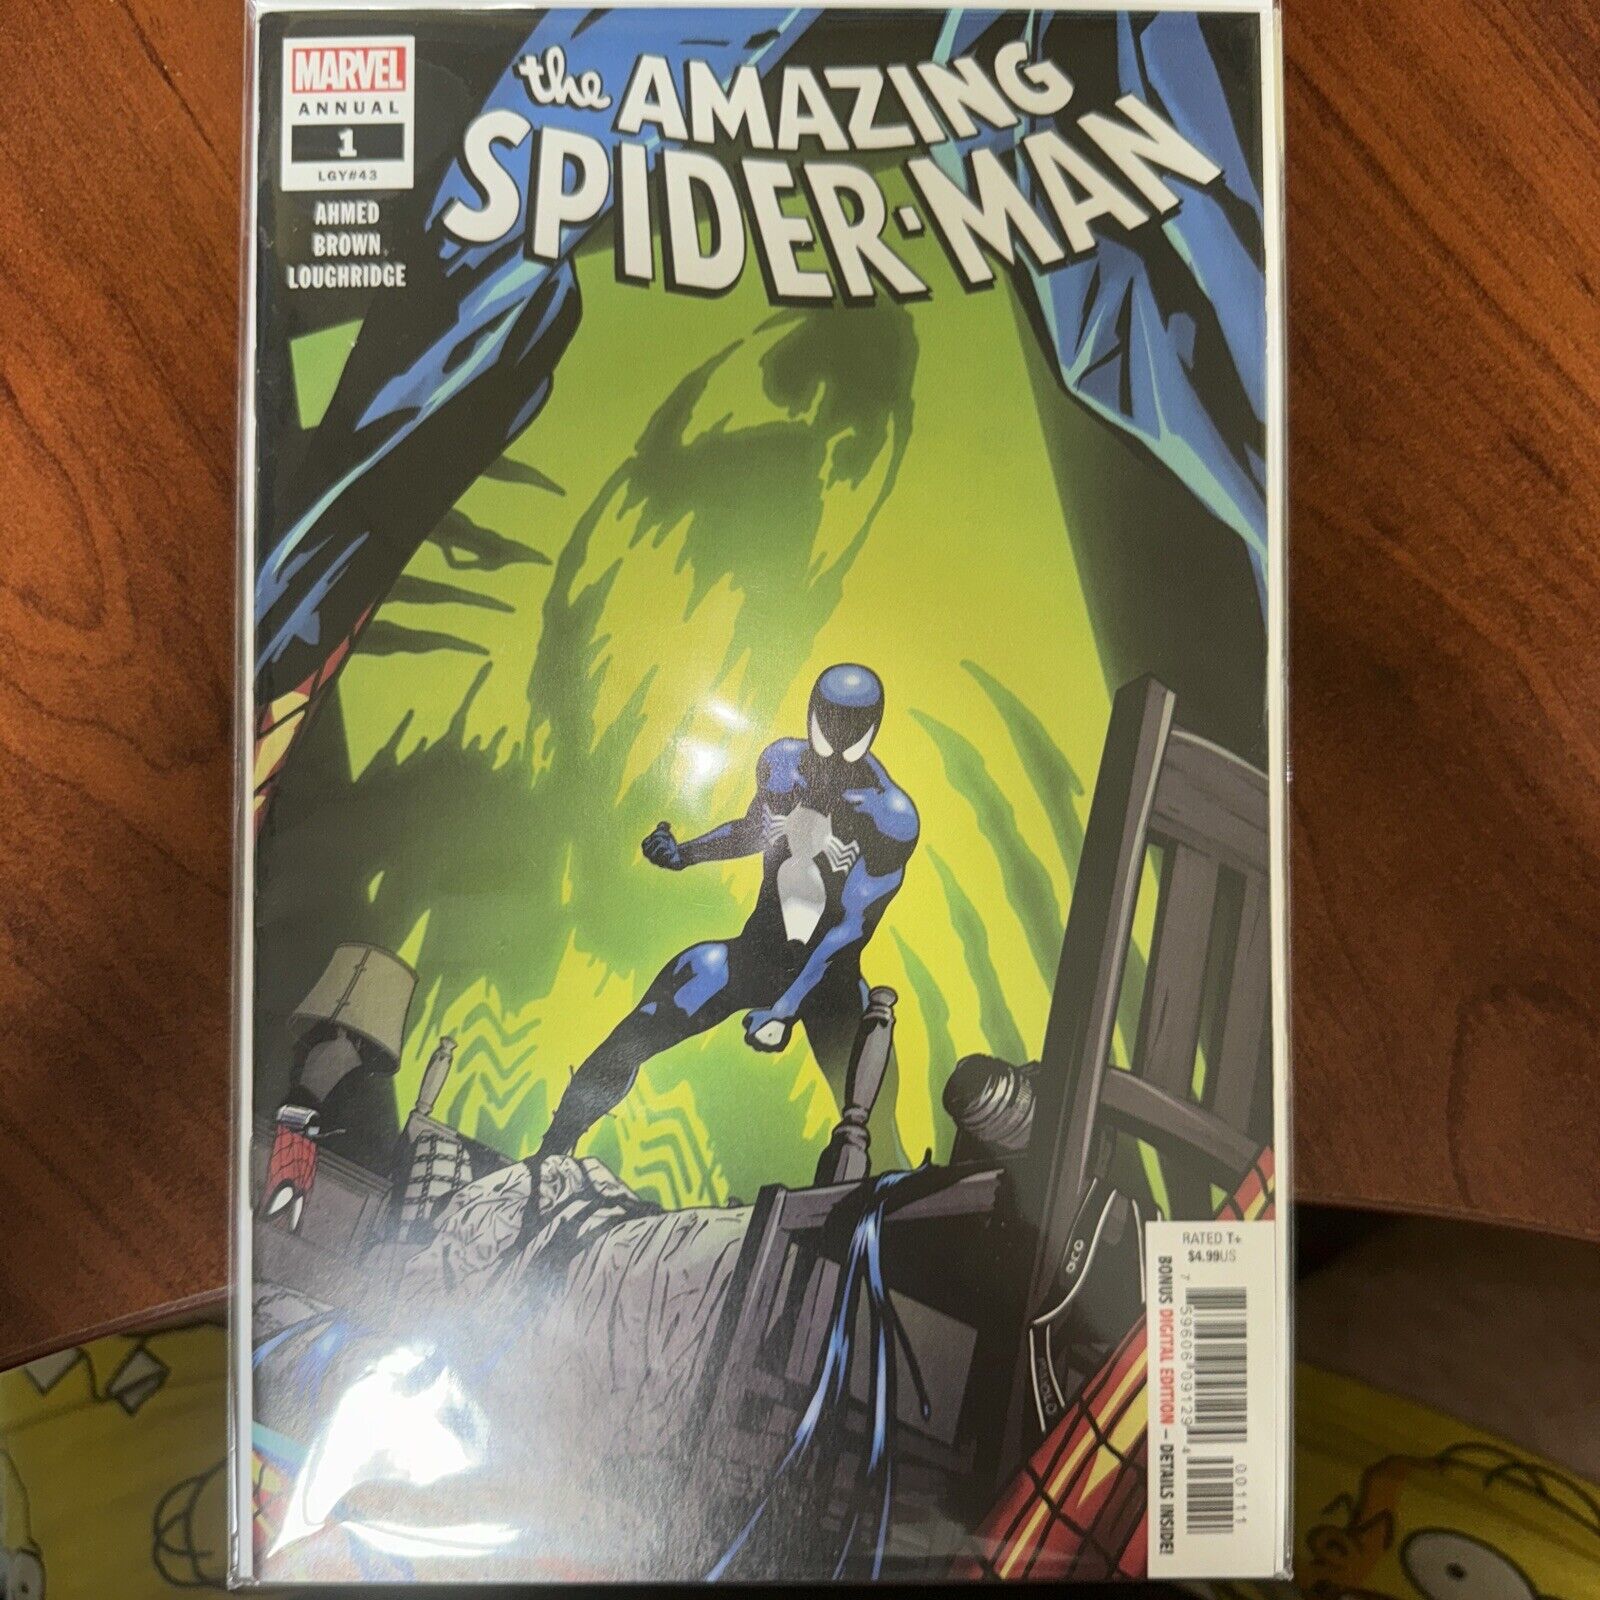 The amazing Spider-Man Annual 1 Lgy#43